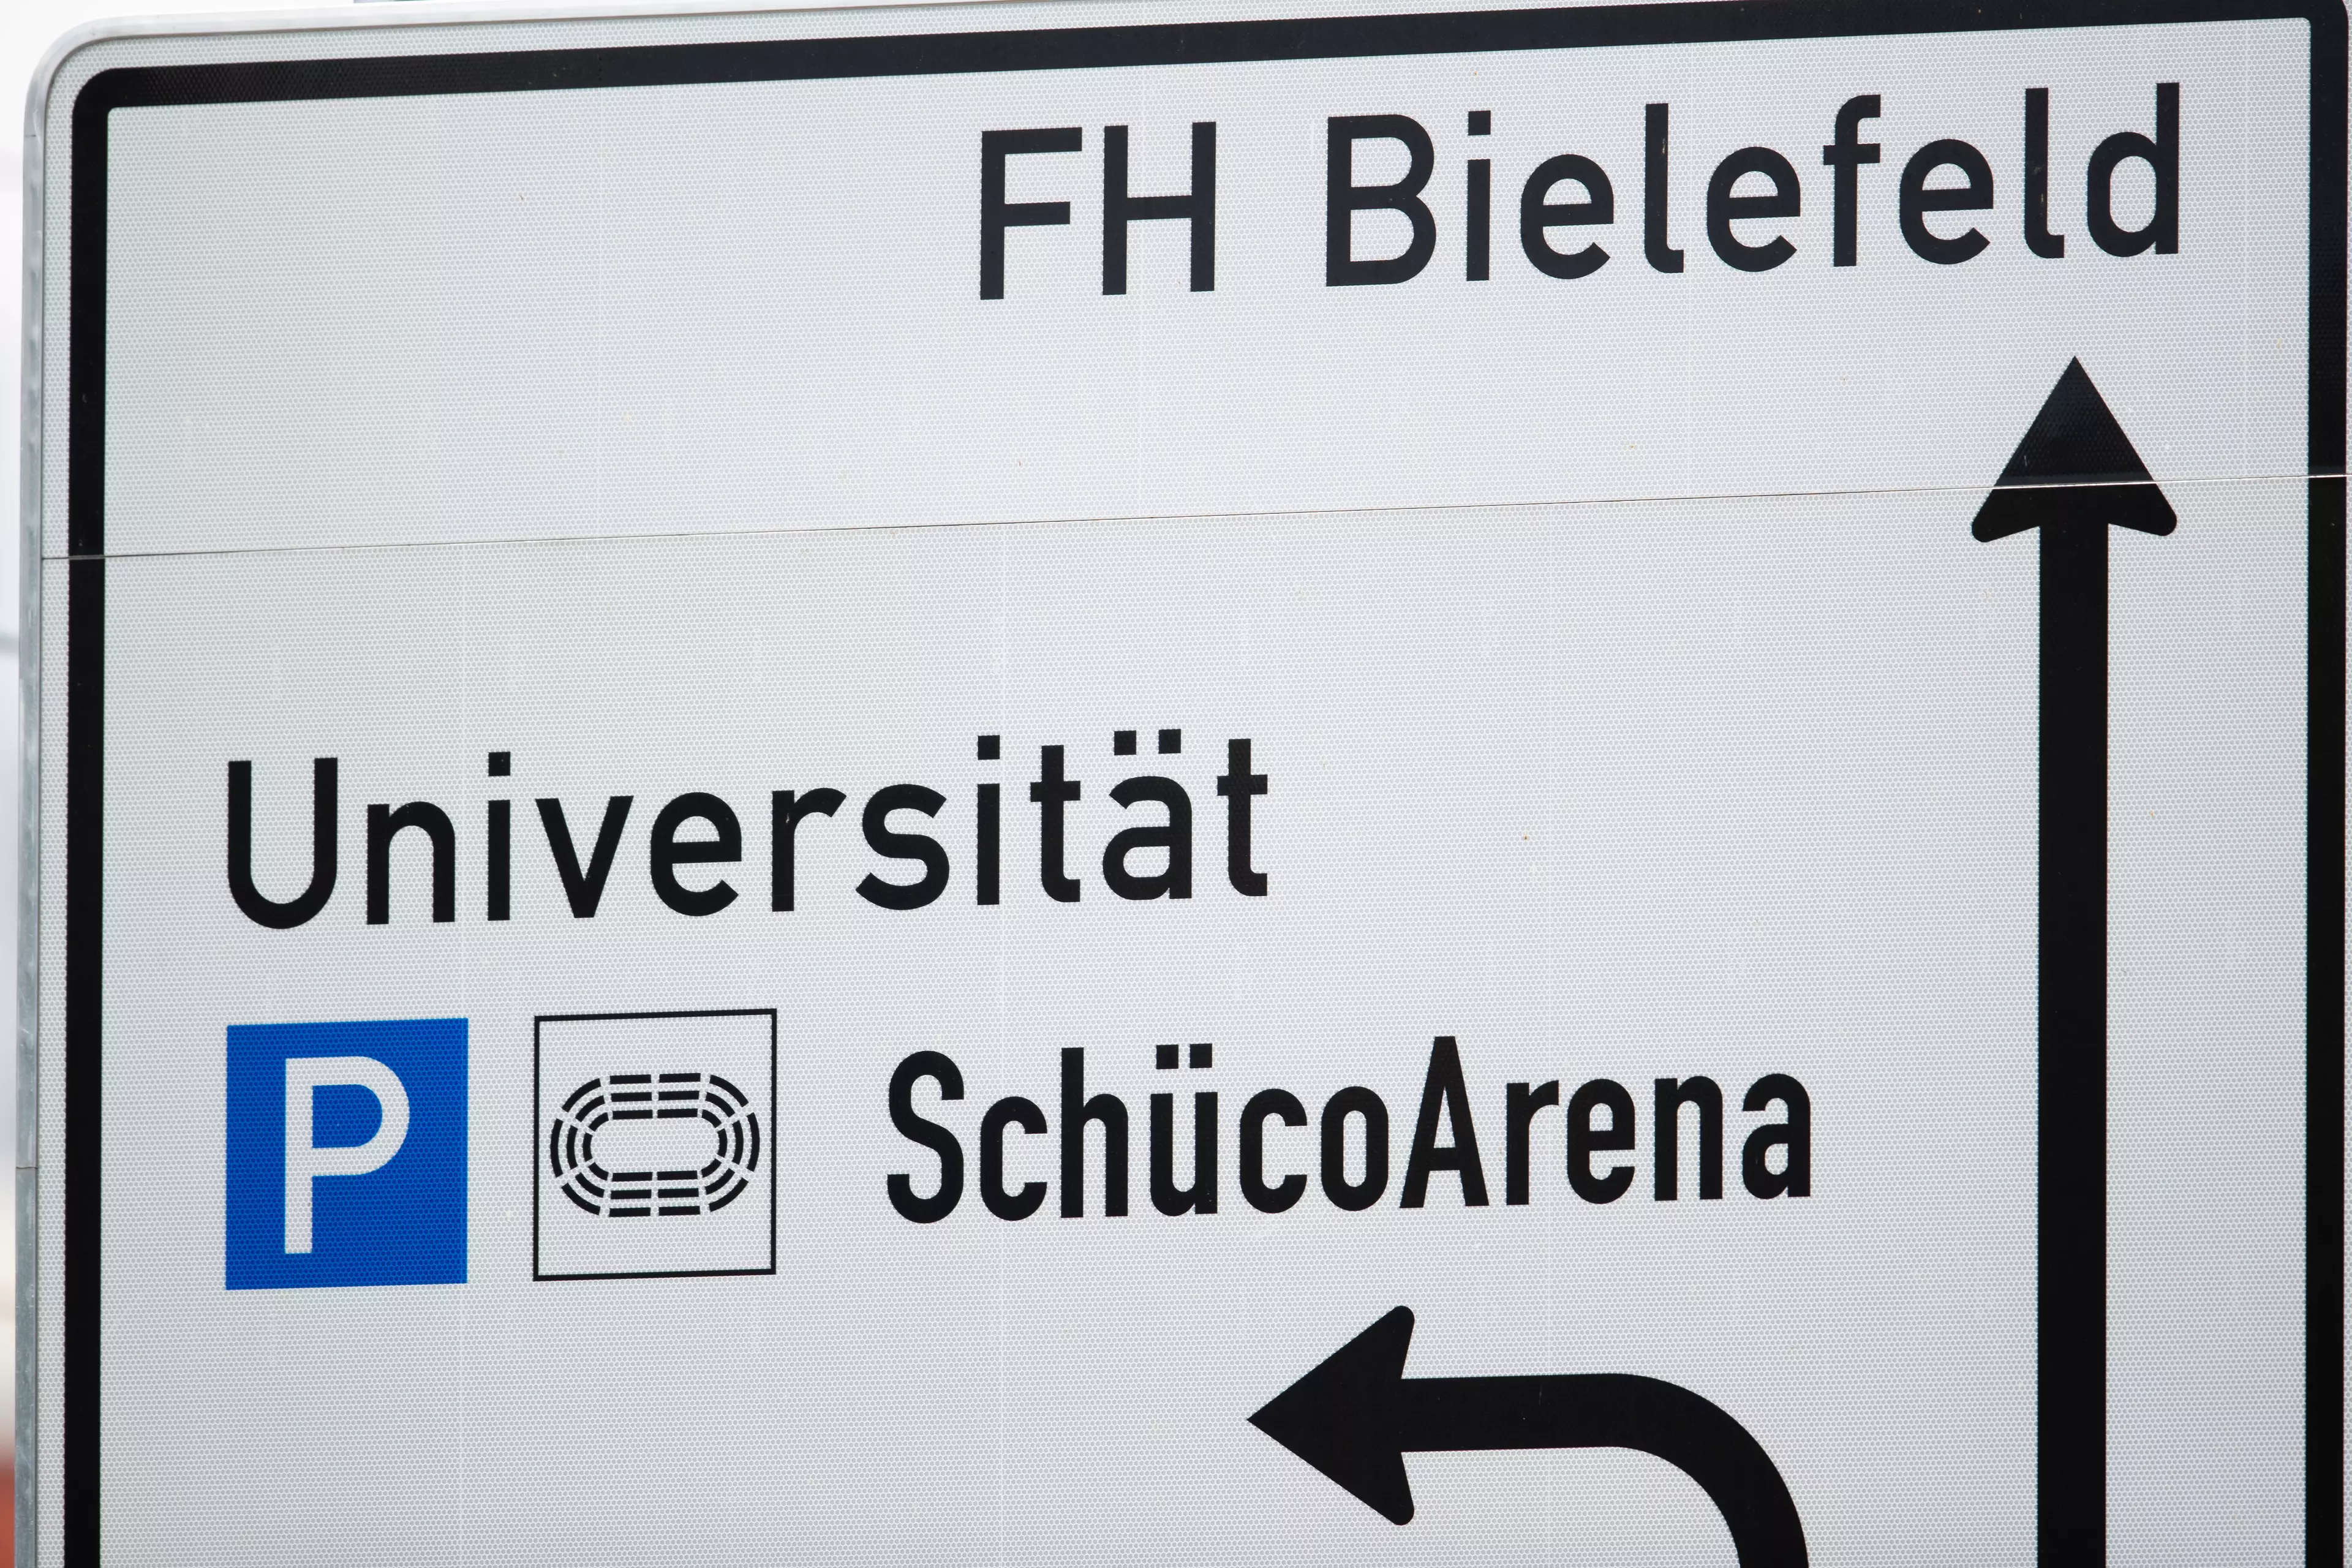 Does Bielefeld exist? Have you ever been? Do you know anyone from there? Do you know anyone who has been?